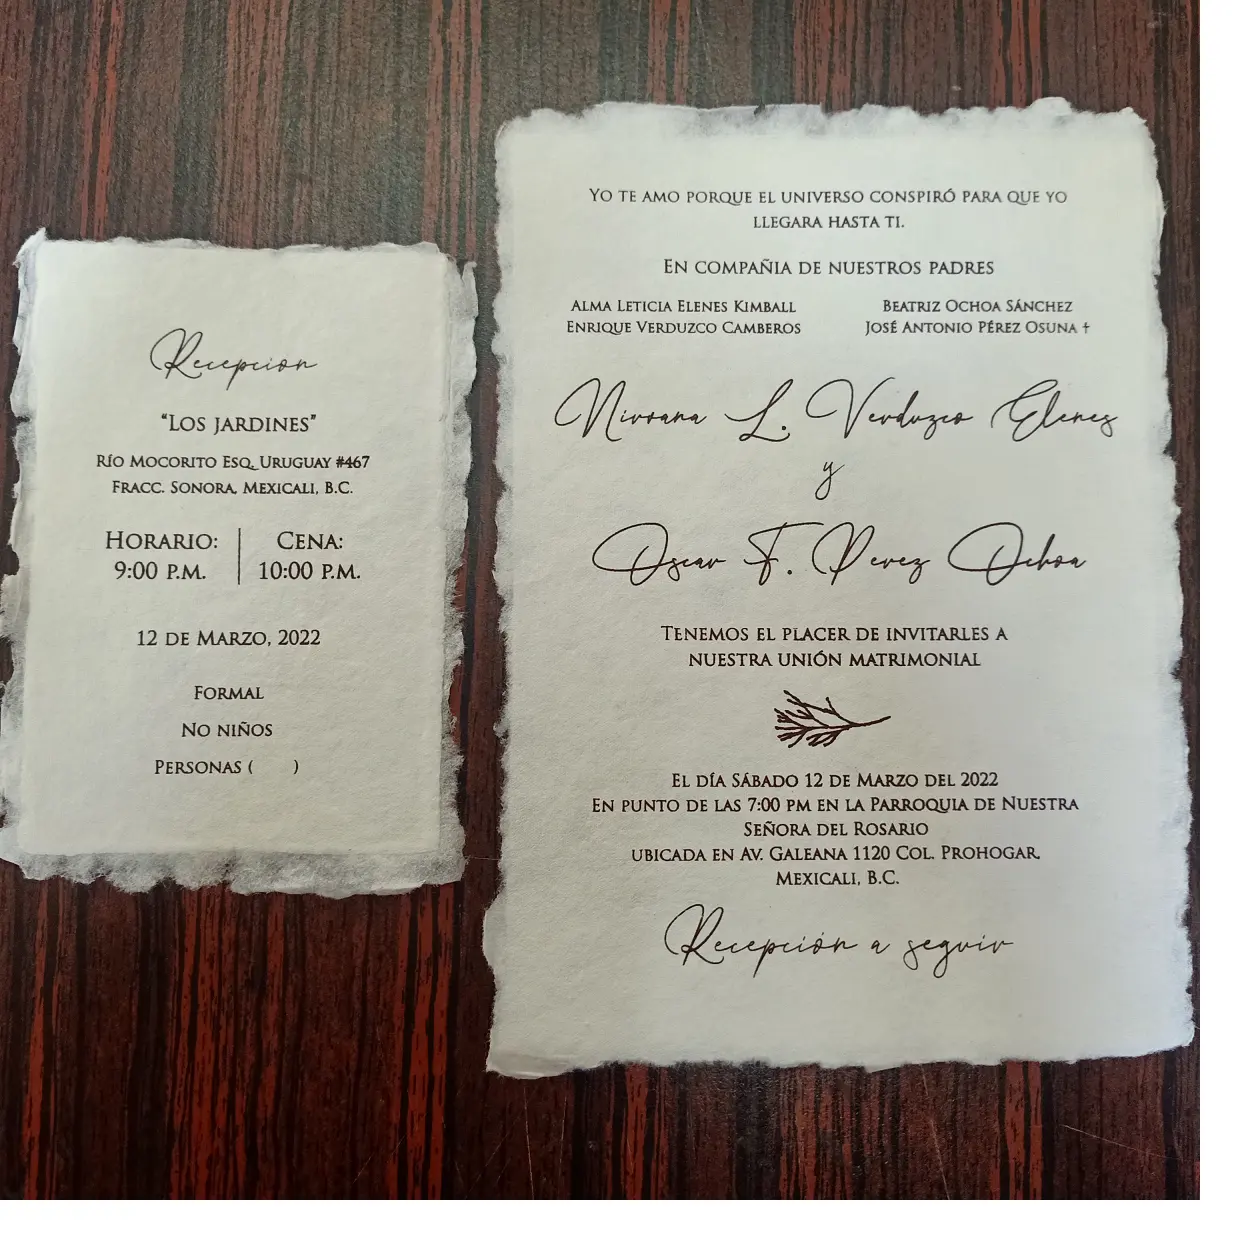 custom made deckle edged wedding invitations cards in spanish text , can be custom printed in your language